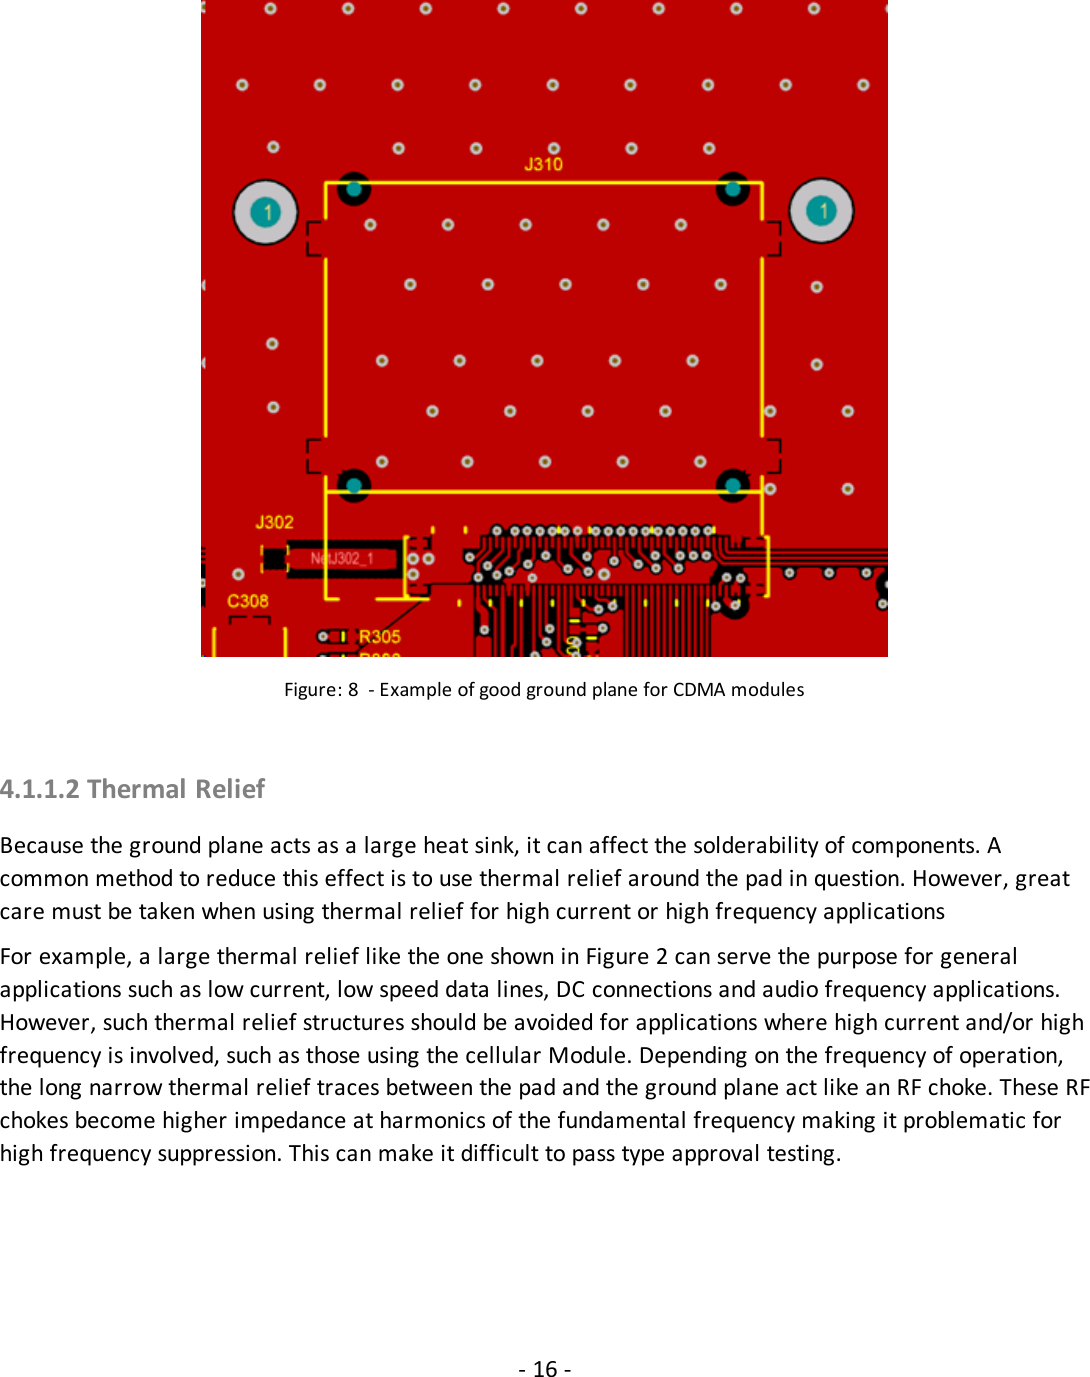 Figure: 8 - Example of good ground plane for CDMA modules4.1.1.2 Thermal ReliefBecause the ground plane acts as a large heat sink, it can affect the solderability of components. Acommon method to reduce this effect is to use thermal relief around the pad in question. However, greatcare must be taken when using thermal relief for high current or high frequency applicationsFor example, a large thermal relief like the one shown in Figure 2 can serve the purpose for generalapplications such as low current, low speed data lines, DC connections and audio frequency applications.However, such thermal relief structures should be avoided for applications where high current and/or highfrequency is involved, such as those using the cellular Module. Depending on the frequency of operation,the long narrow thermal relief traces between the pad and the ground plane act like an RF choke. These RFchokes become higher impedance at harmonics of the fundamental frequency making it problematic forhigh frequency suppression. This can make it difficult to pass type approval testing.- 16 -